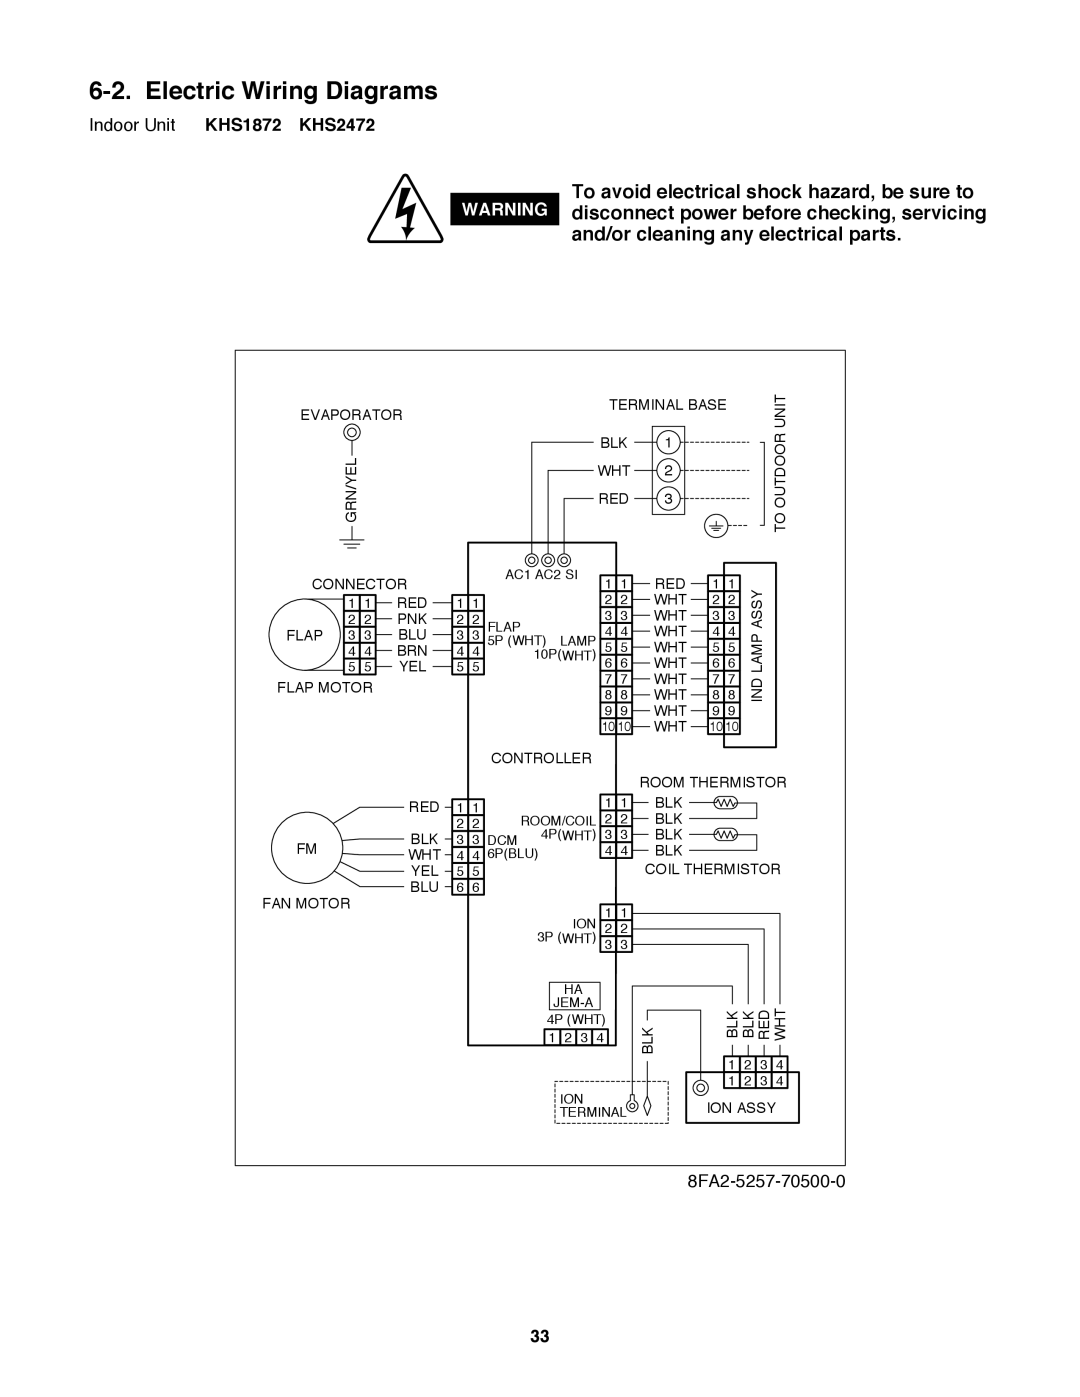 Sanyo CH1872, CH2472 service manual Electric Wiring Diagrams, Indoor Unit KHS1872 KHS2472 